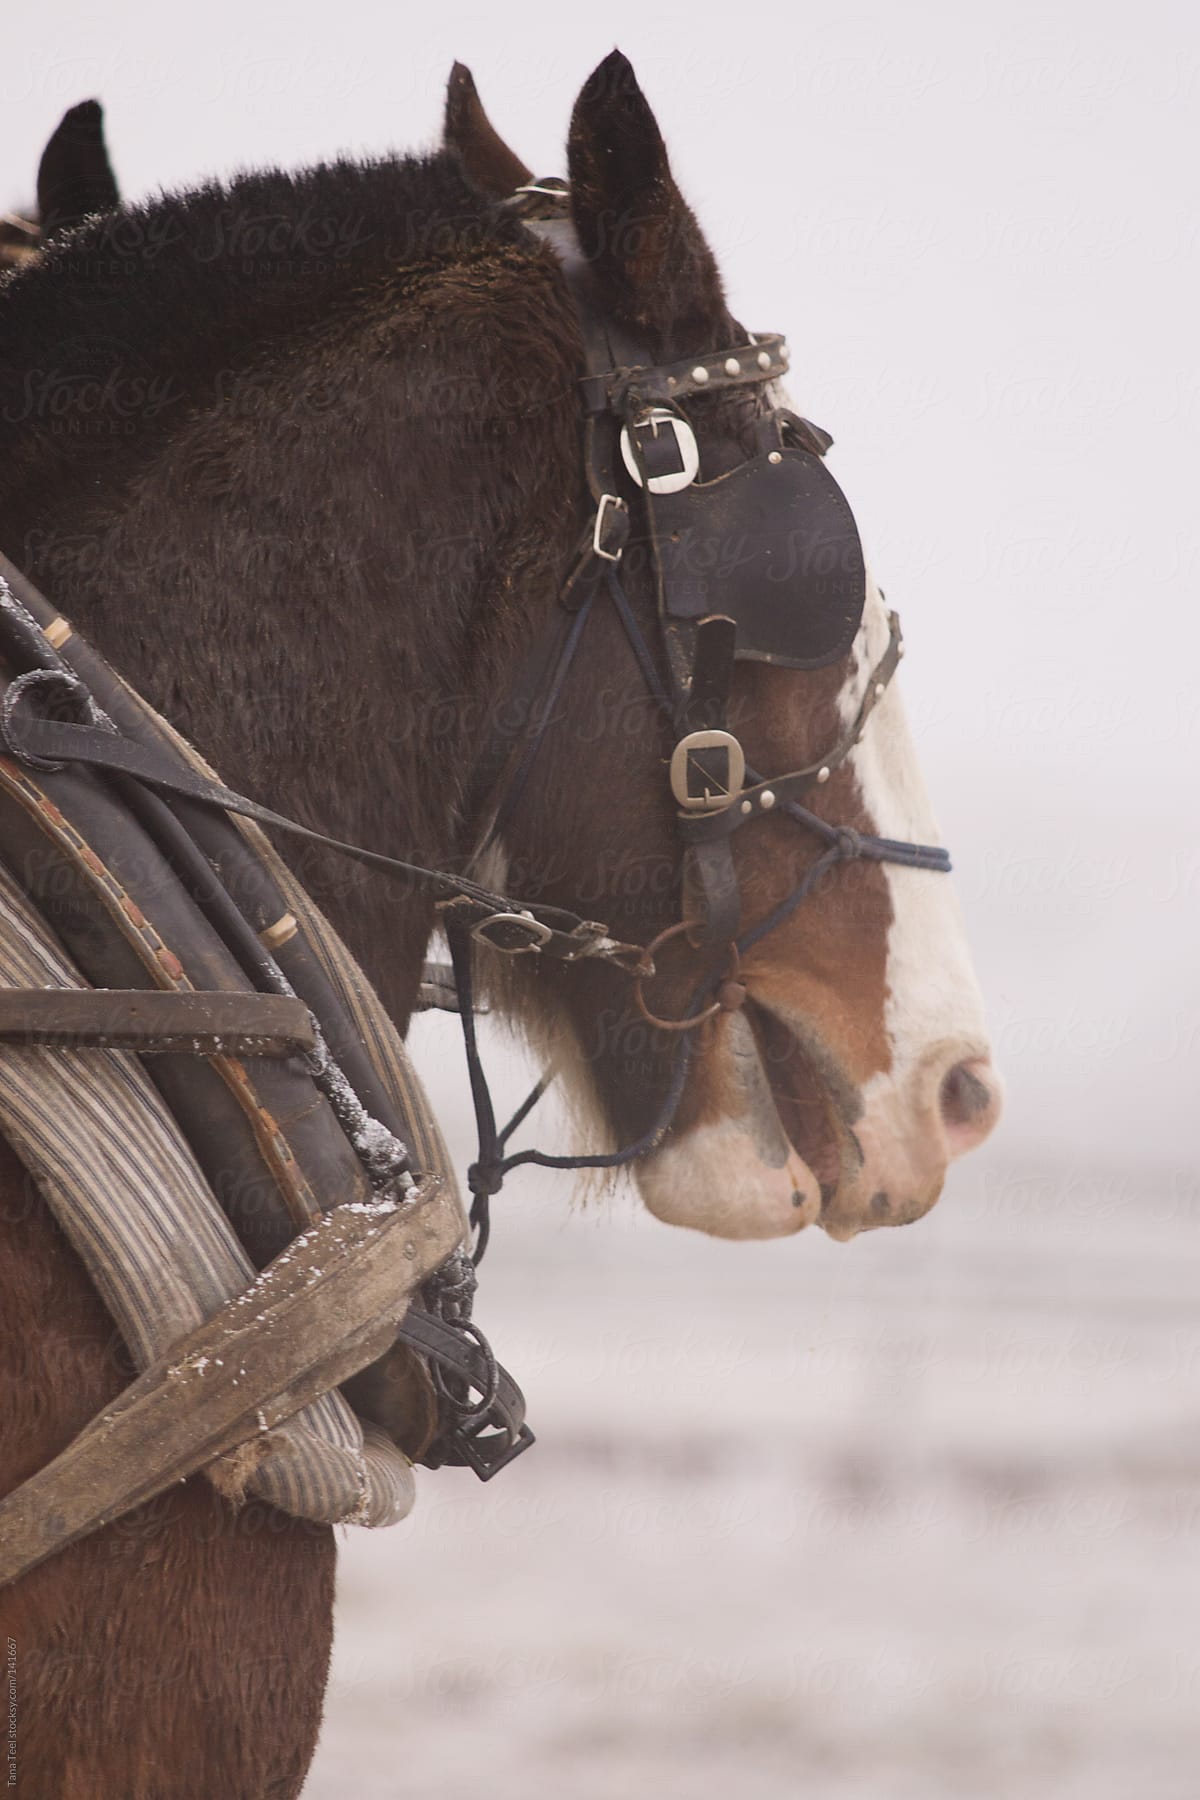 A draft horse stands ready to pull